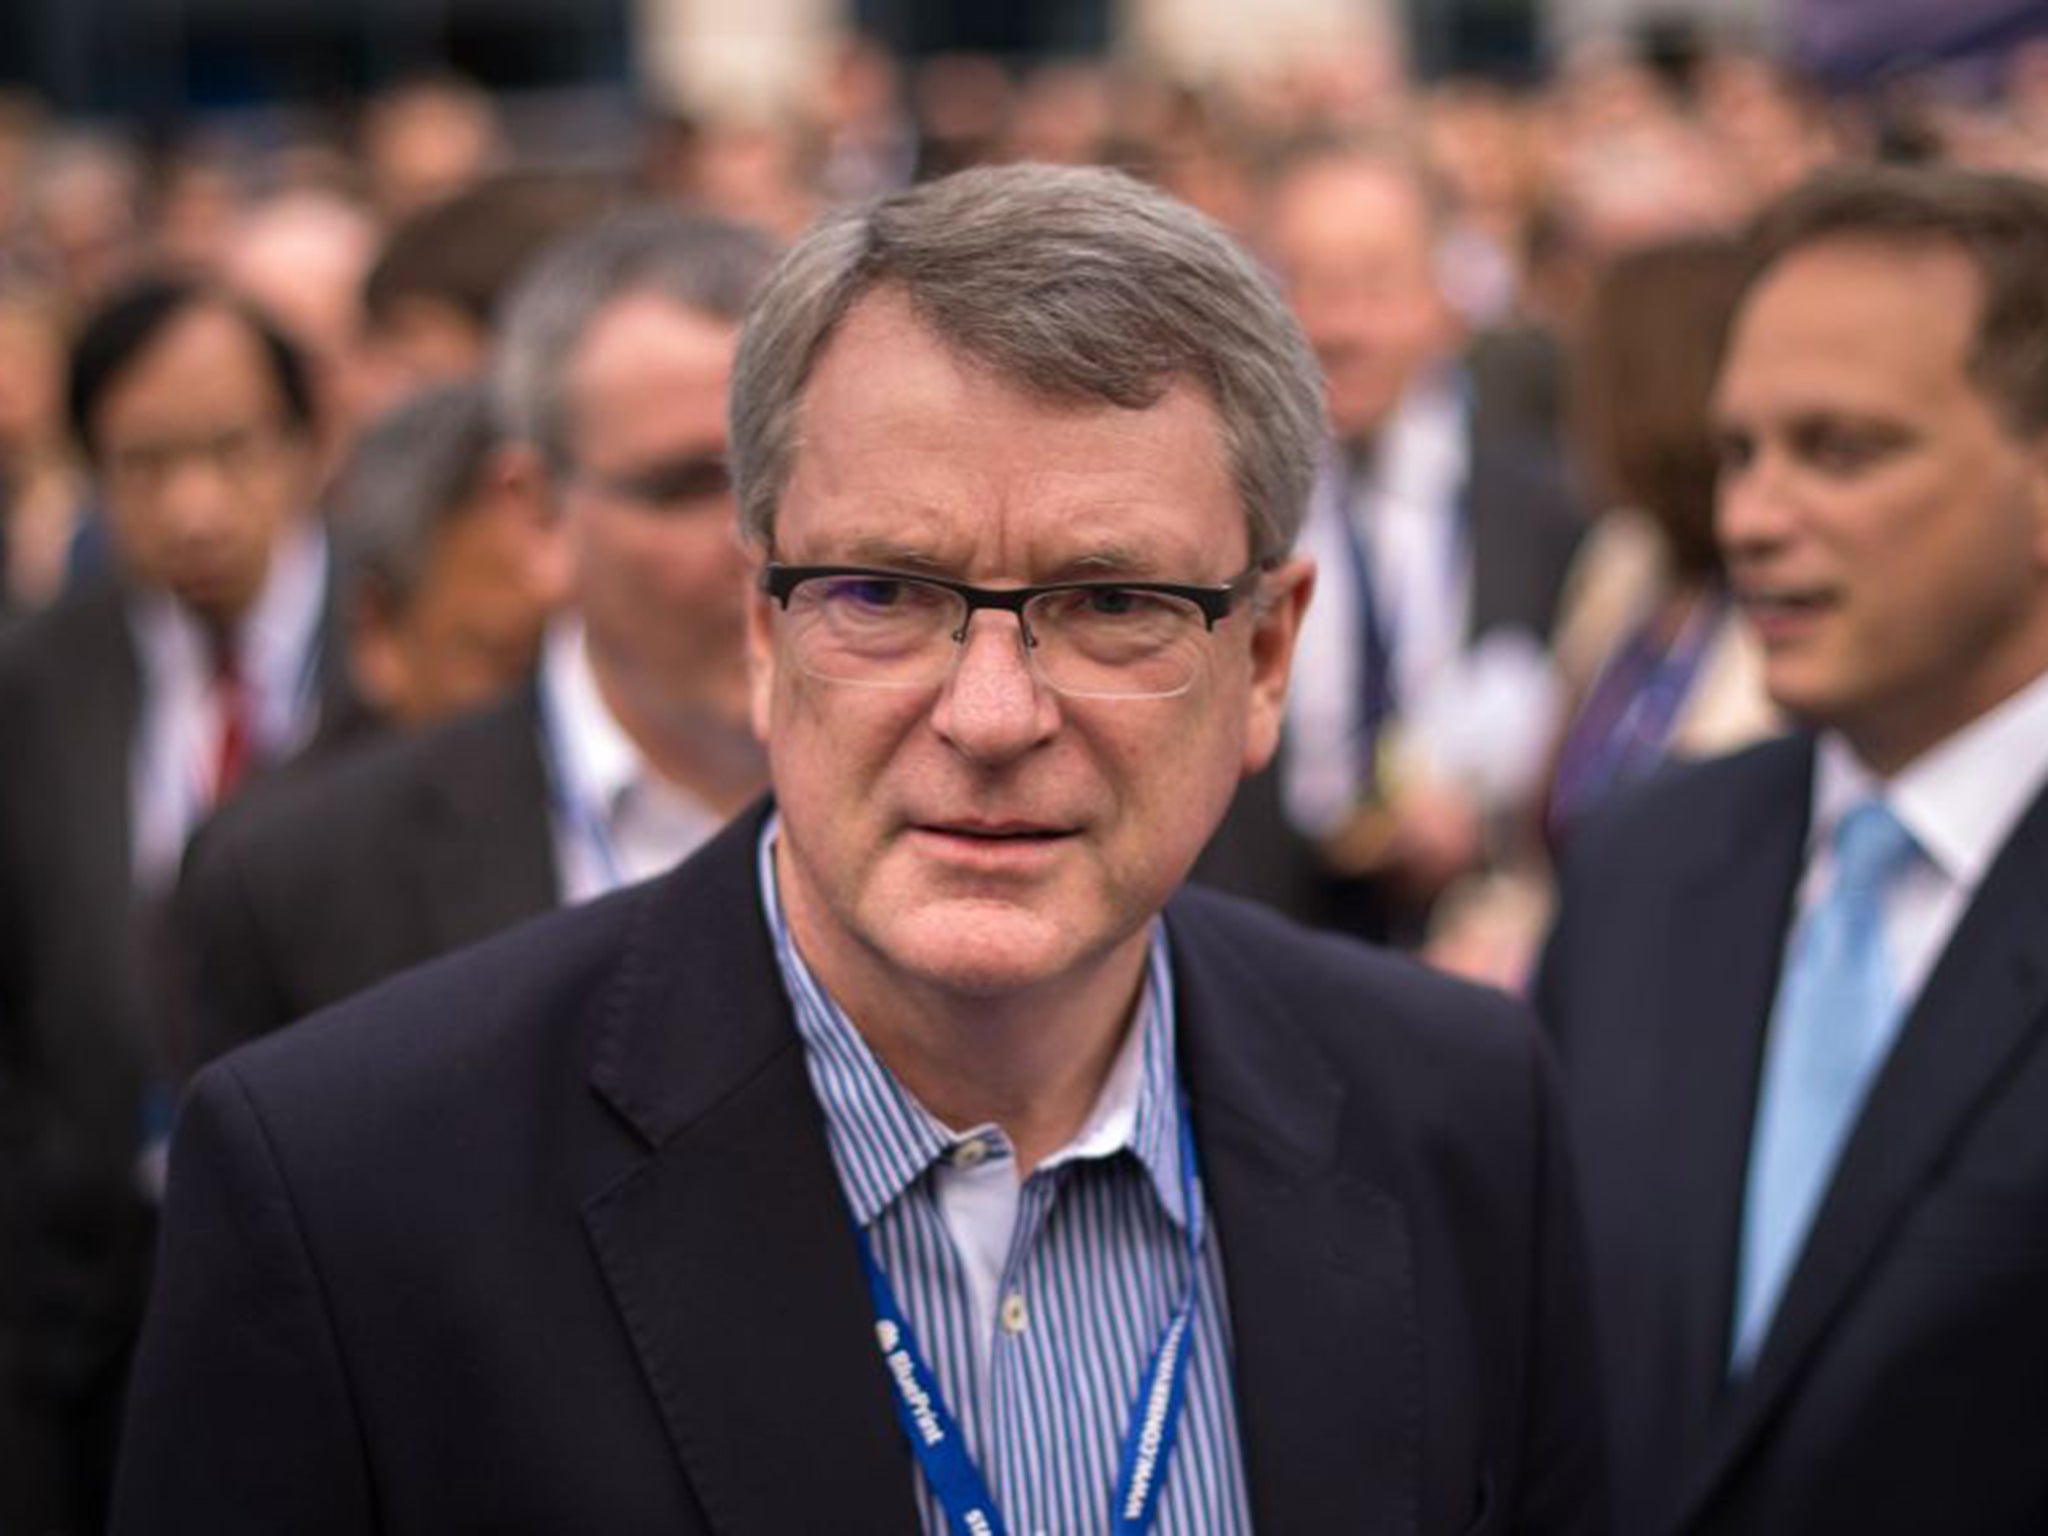 Lynton Crosby is said to view humanist weddings as a ‘fringe issue’ for the Tories